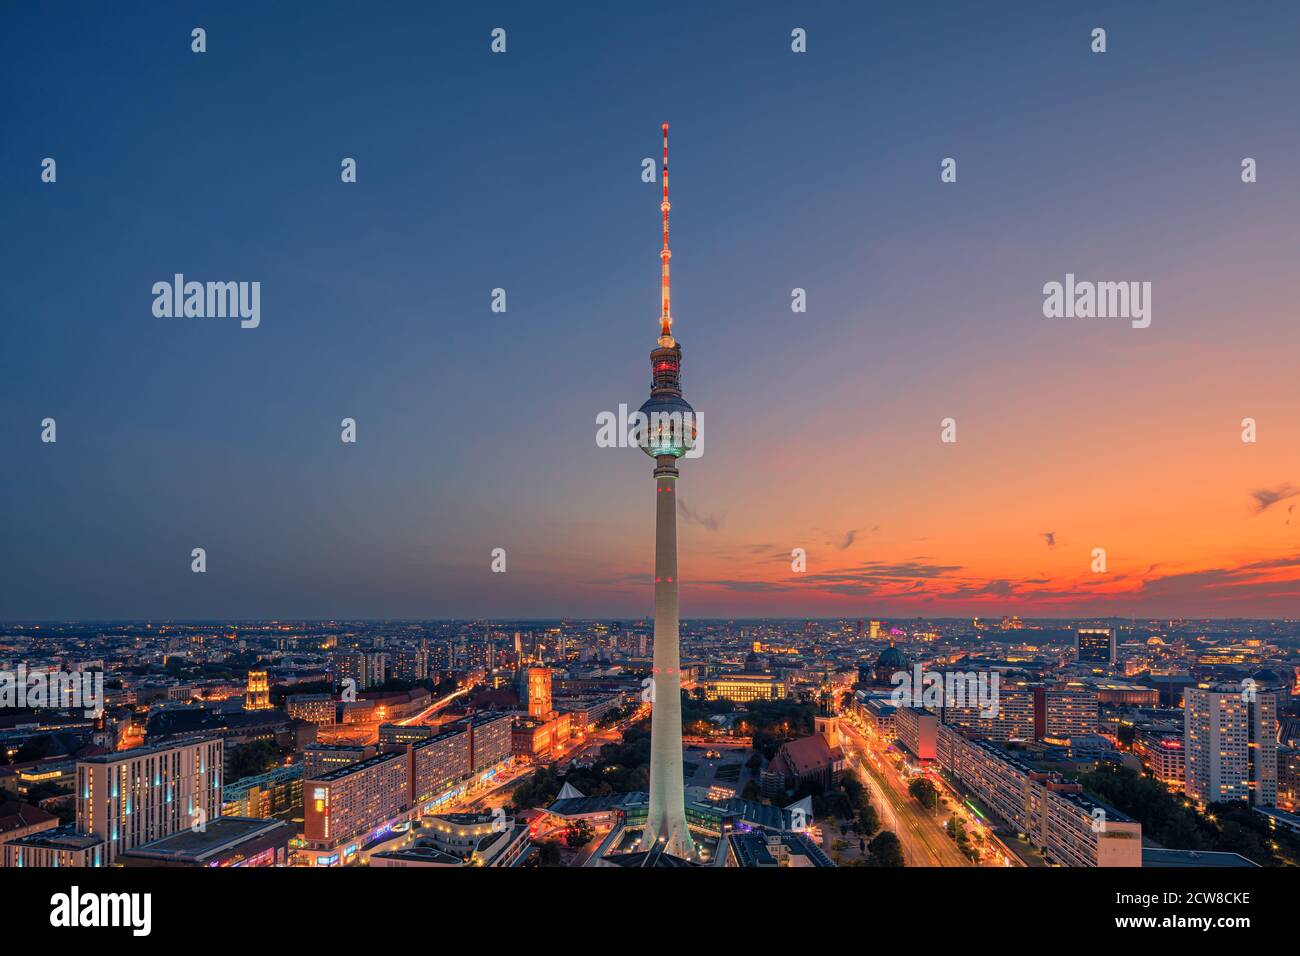 Sunset at the Berlin TV Tower. The Berliner Fernsehturm or Fernsehturm Berlin (English: Berlin Television Tower) is a television tower in central Berl Stock Photo